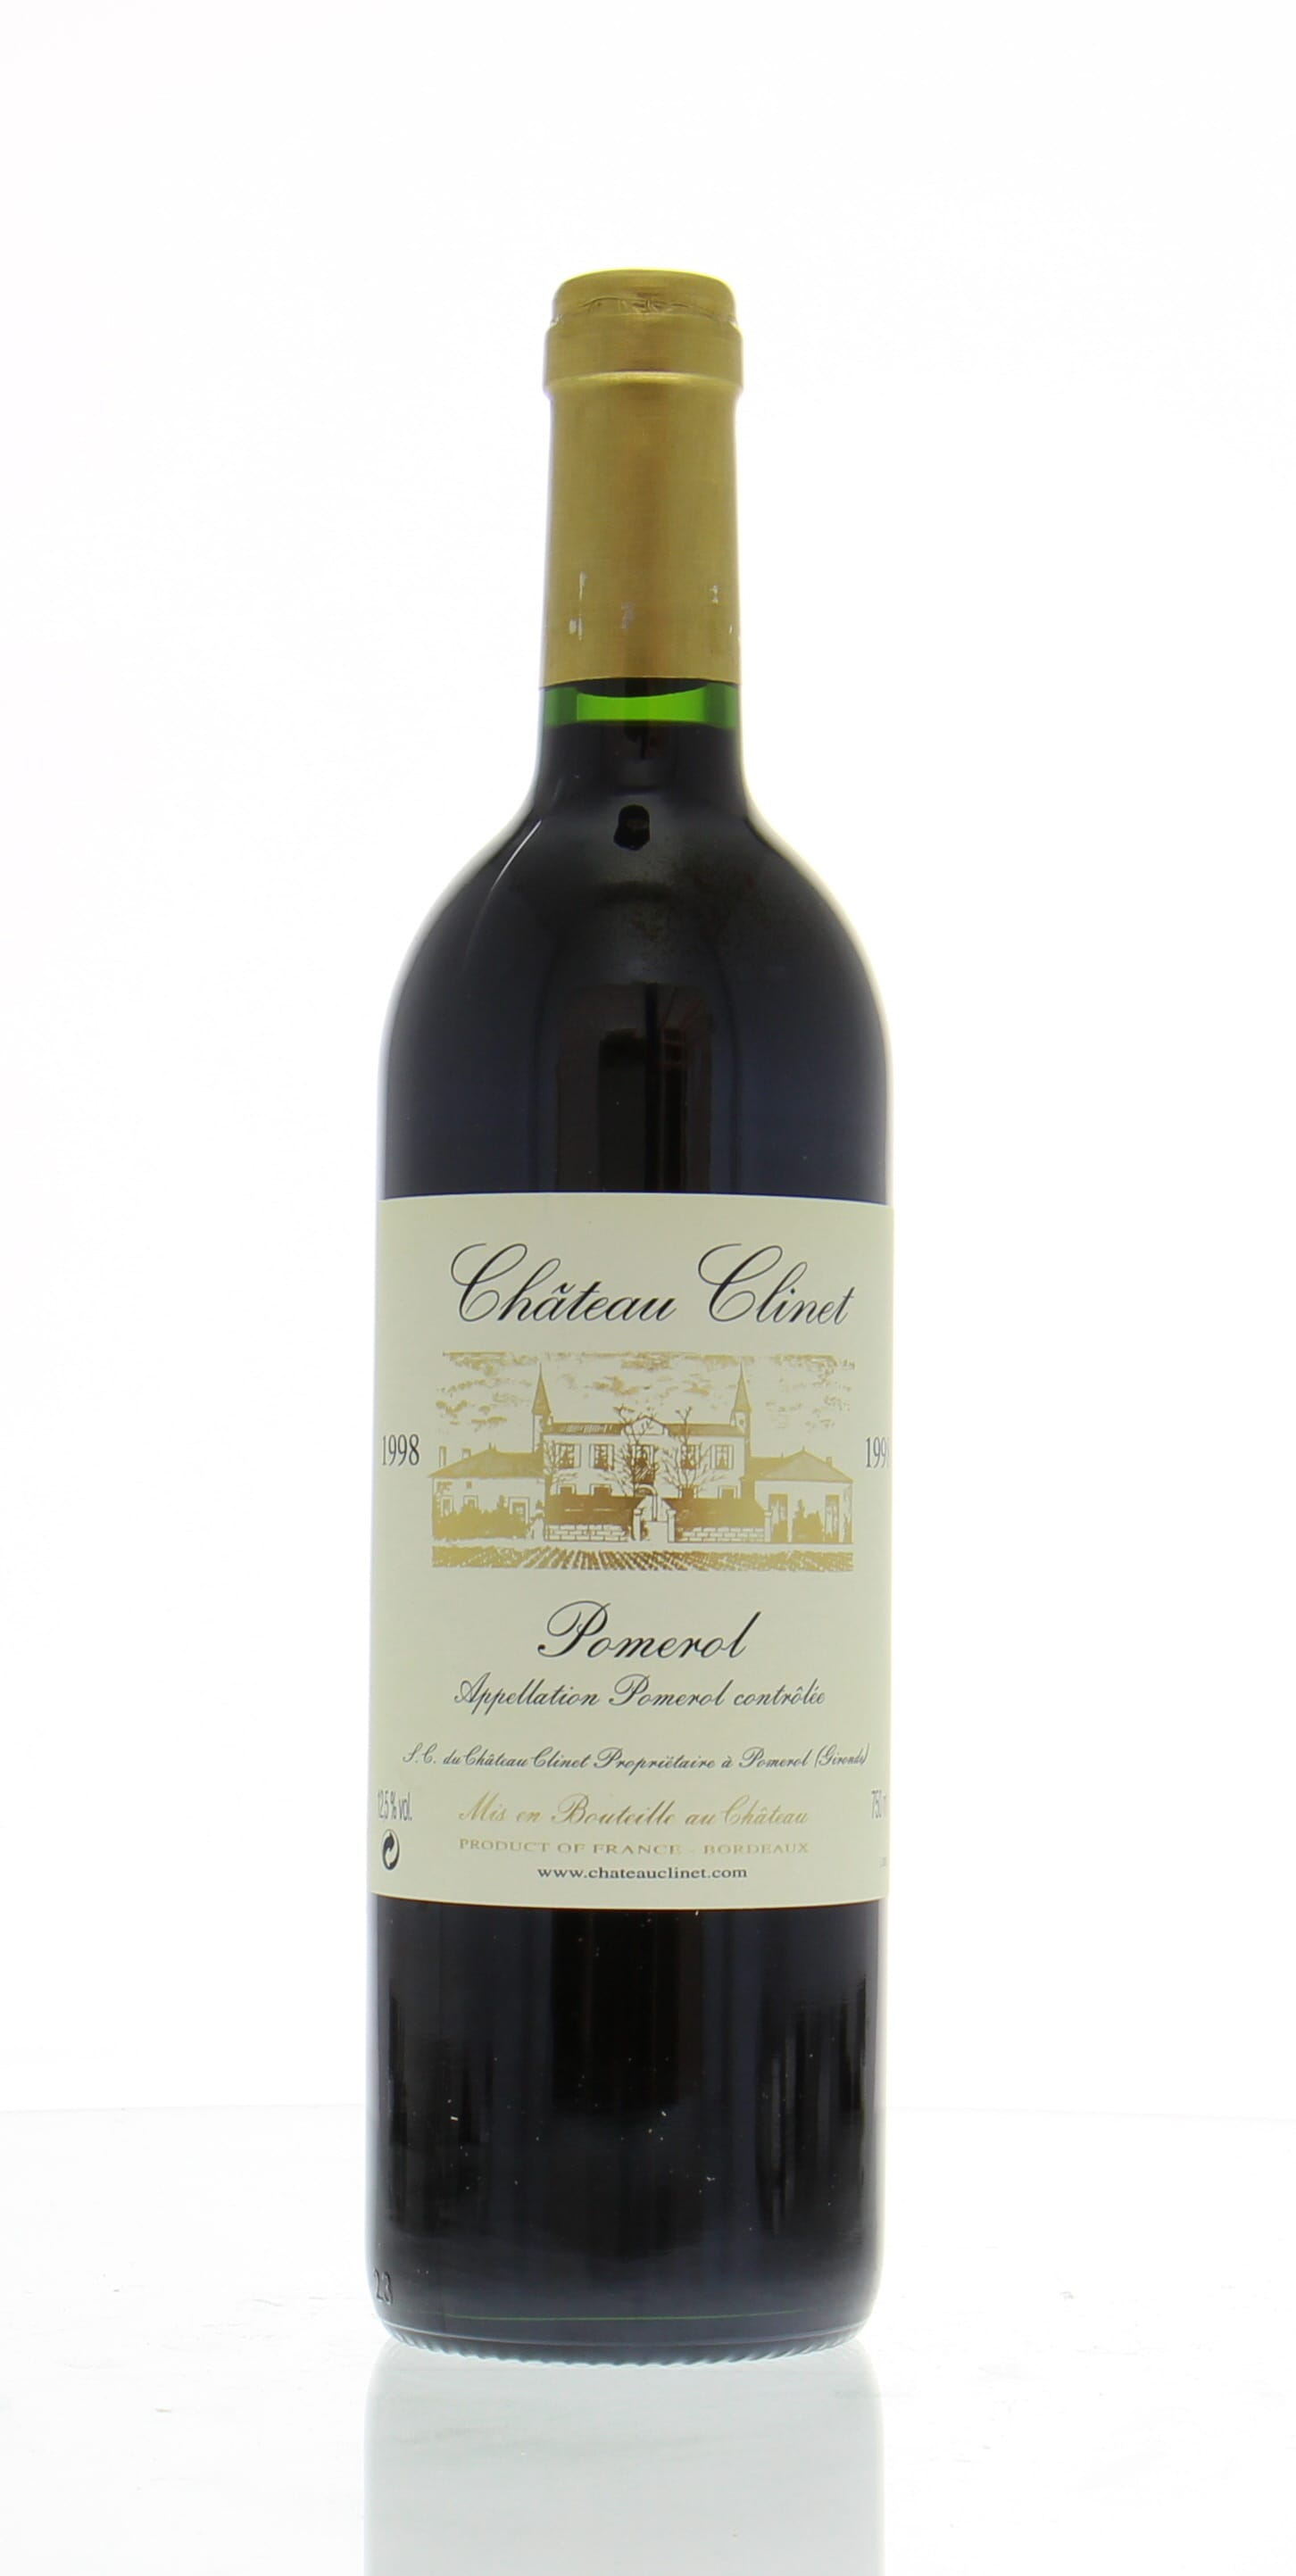 Chateau Clinet - Chateau Clinet 1998 From Original Wooden Case